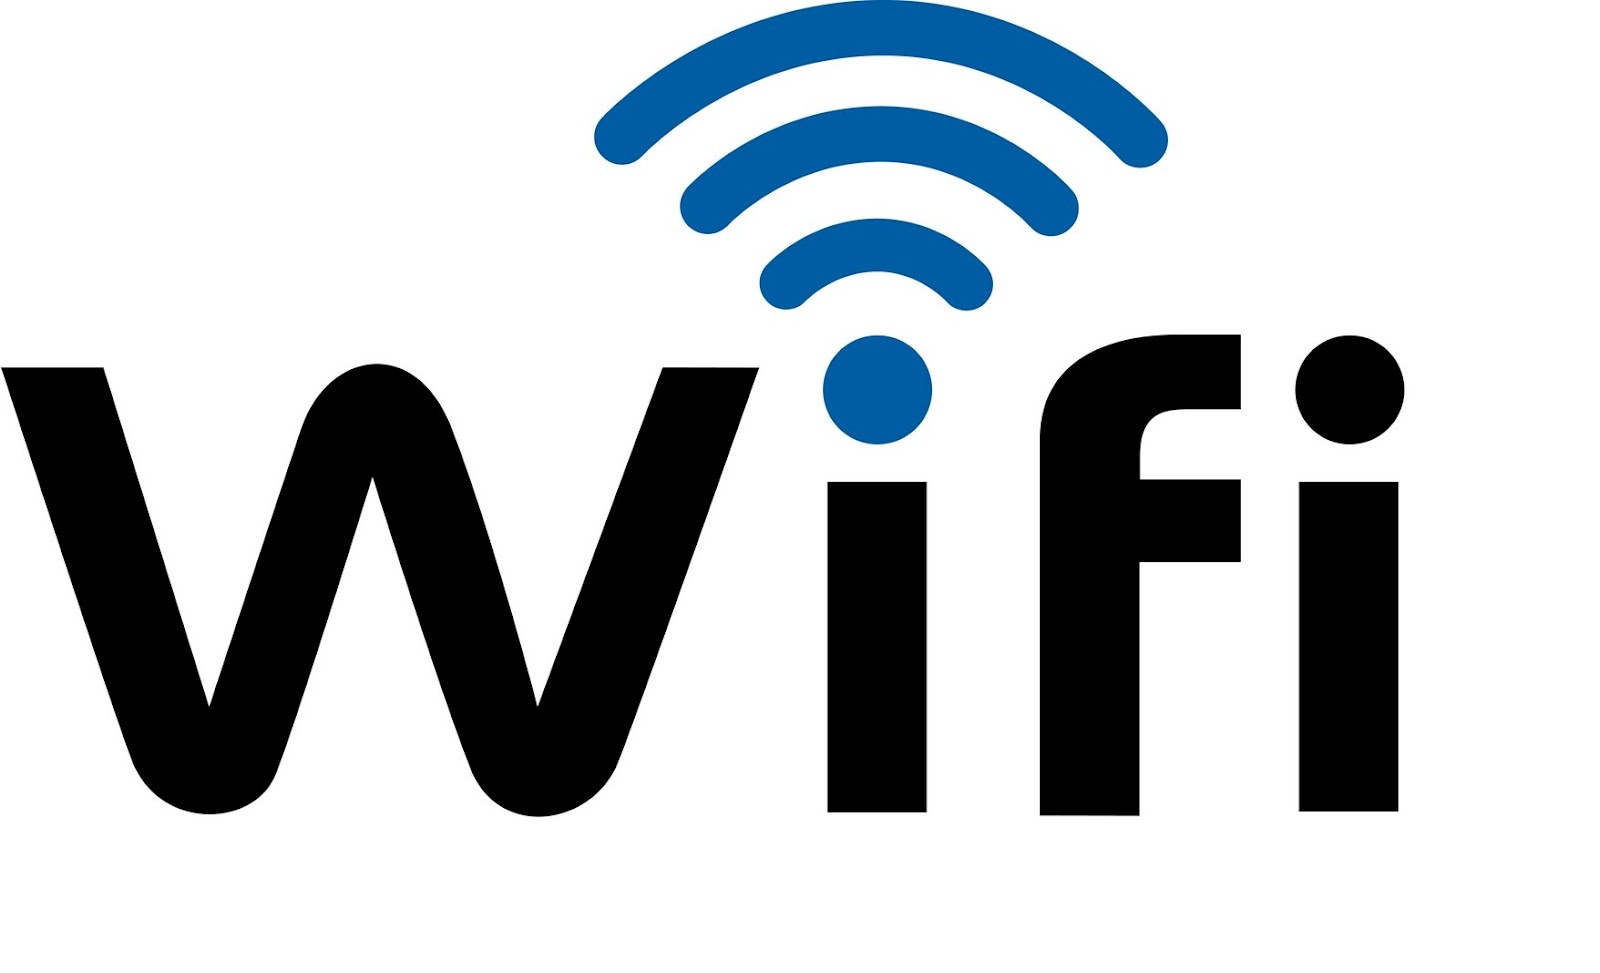 Free wifi clipart